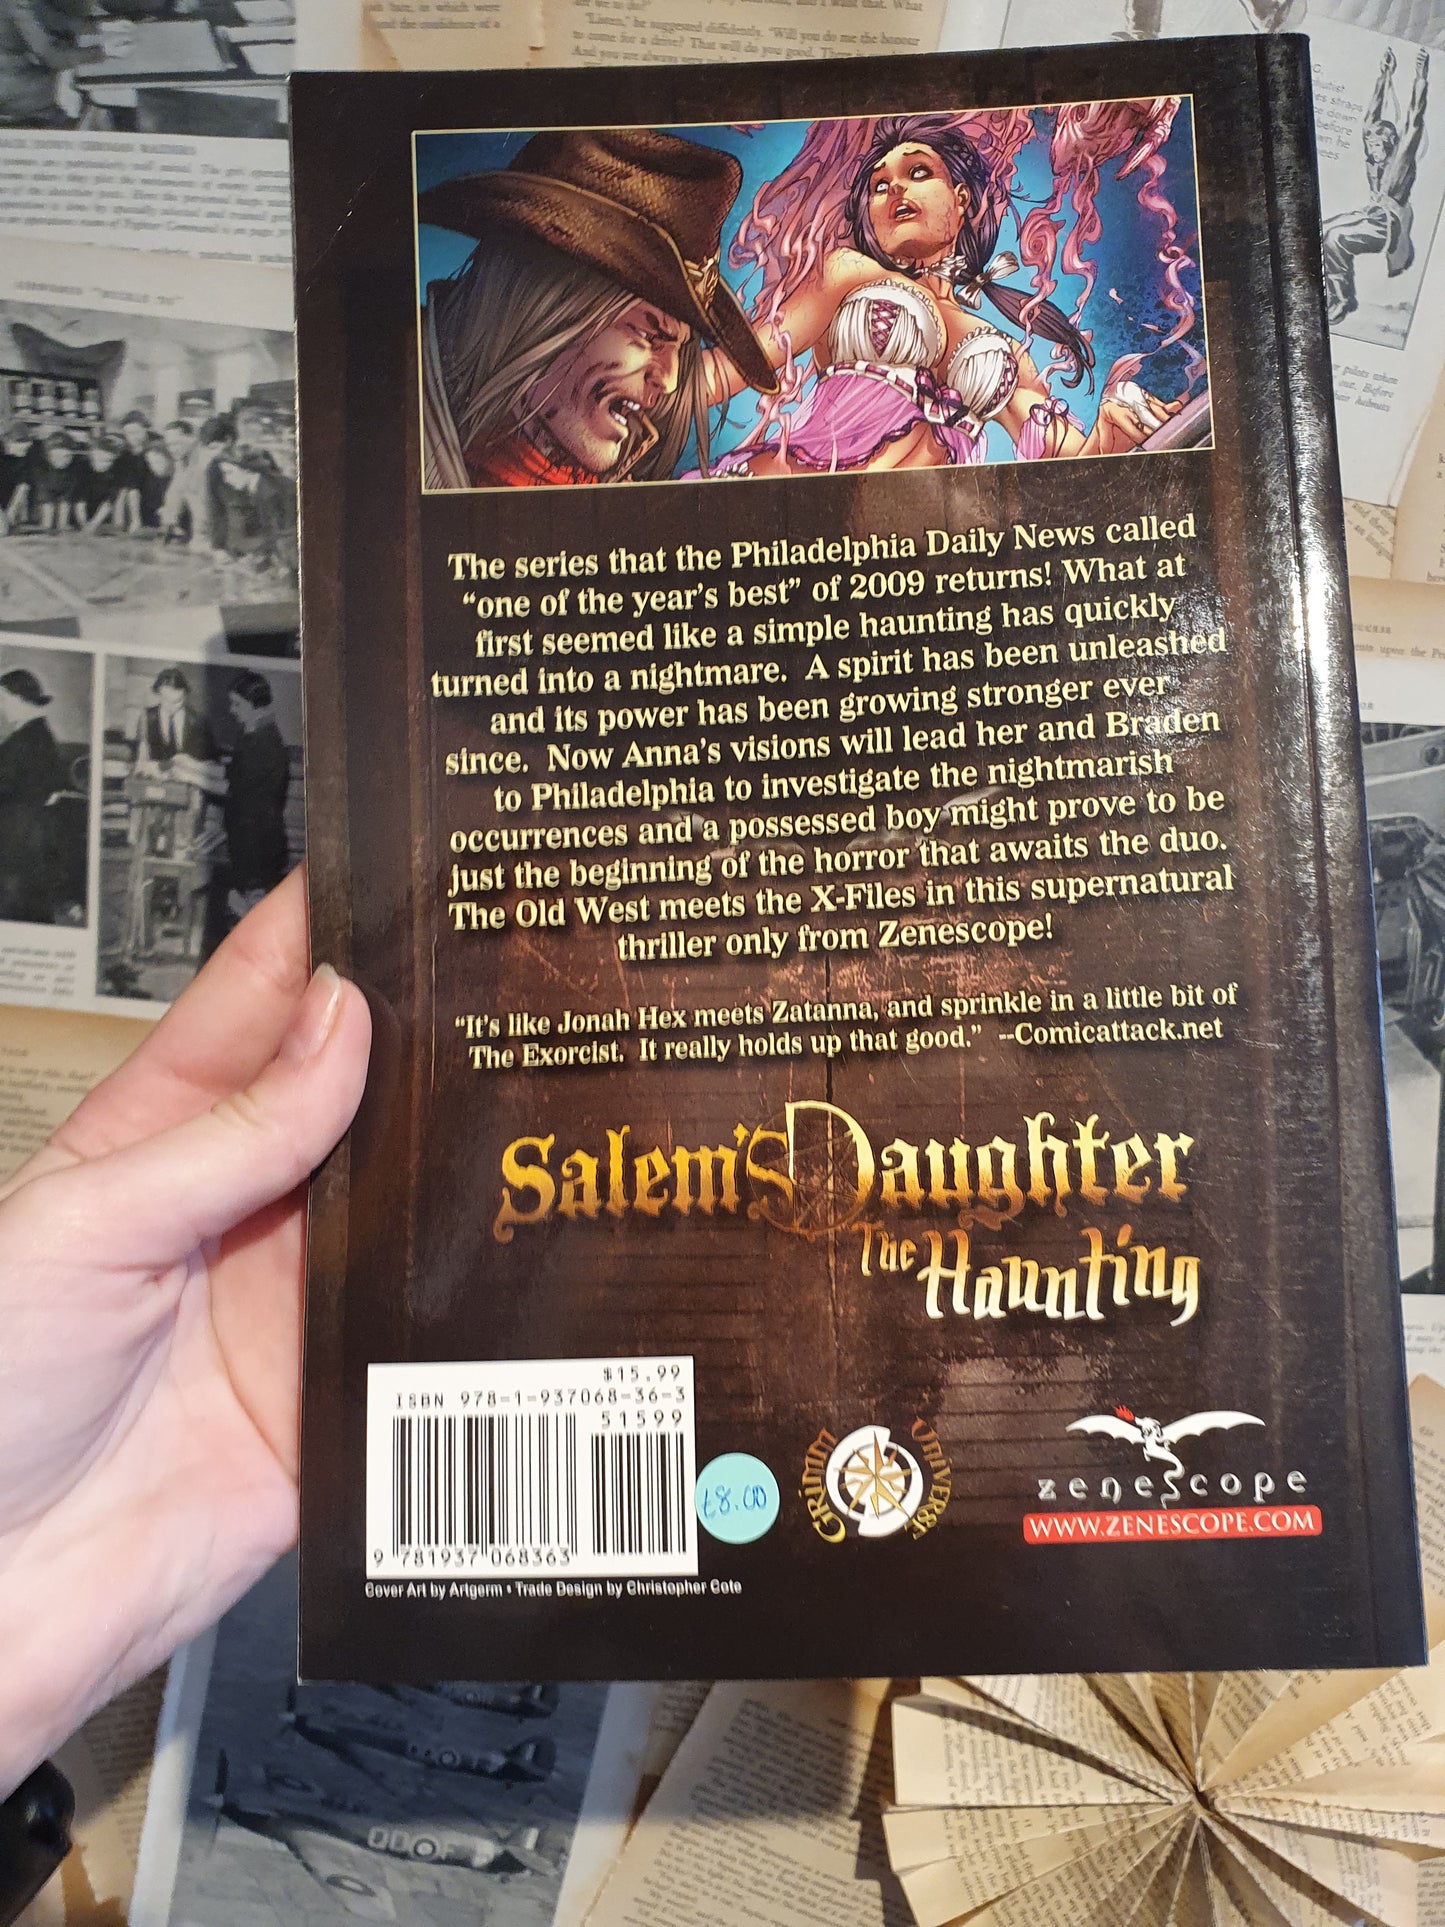 Salem's Daughter Vol 2 The Haunting by Tedesco, Otero & Pilcz (2012)